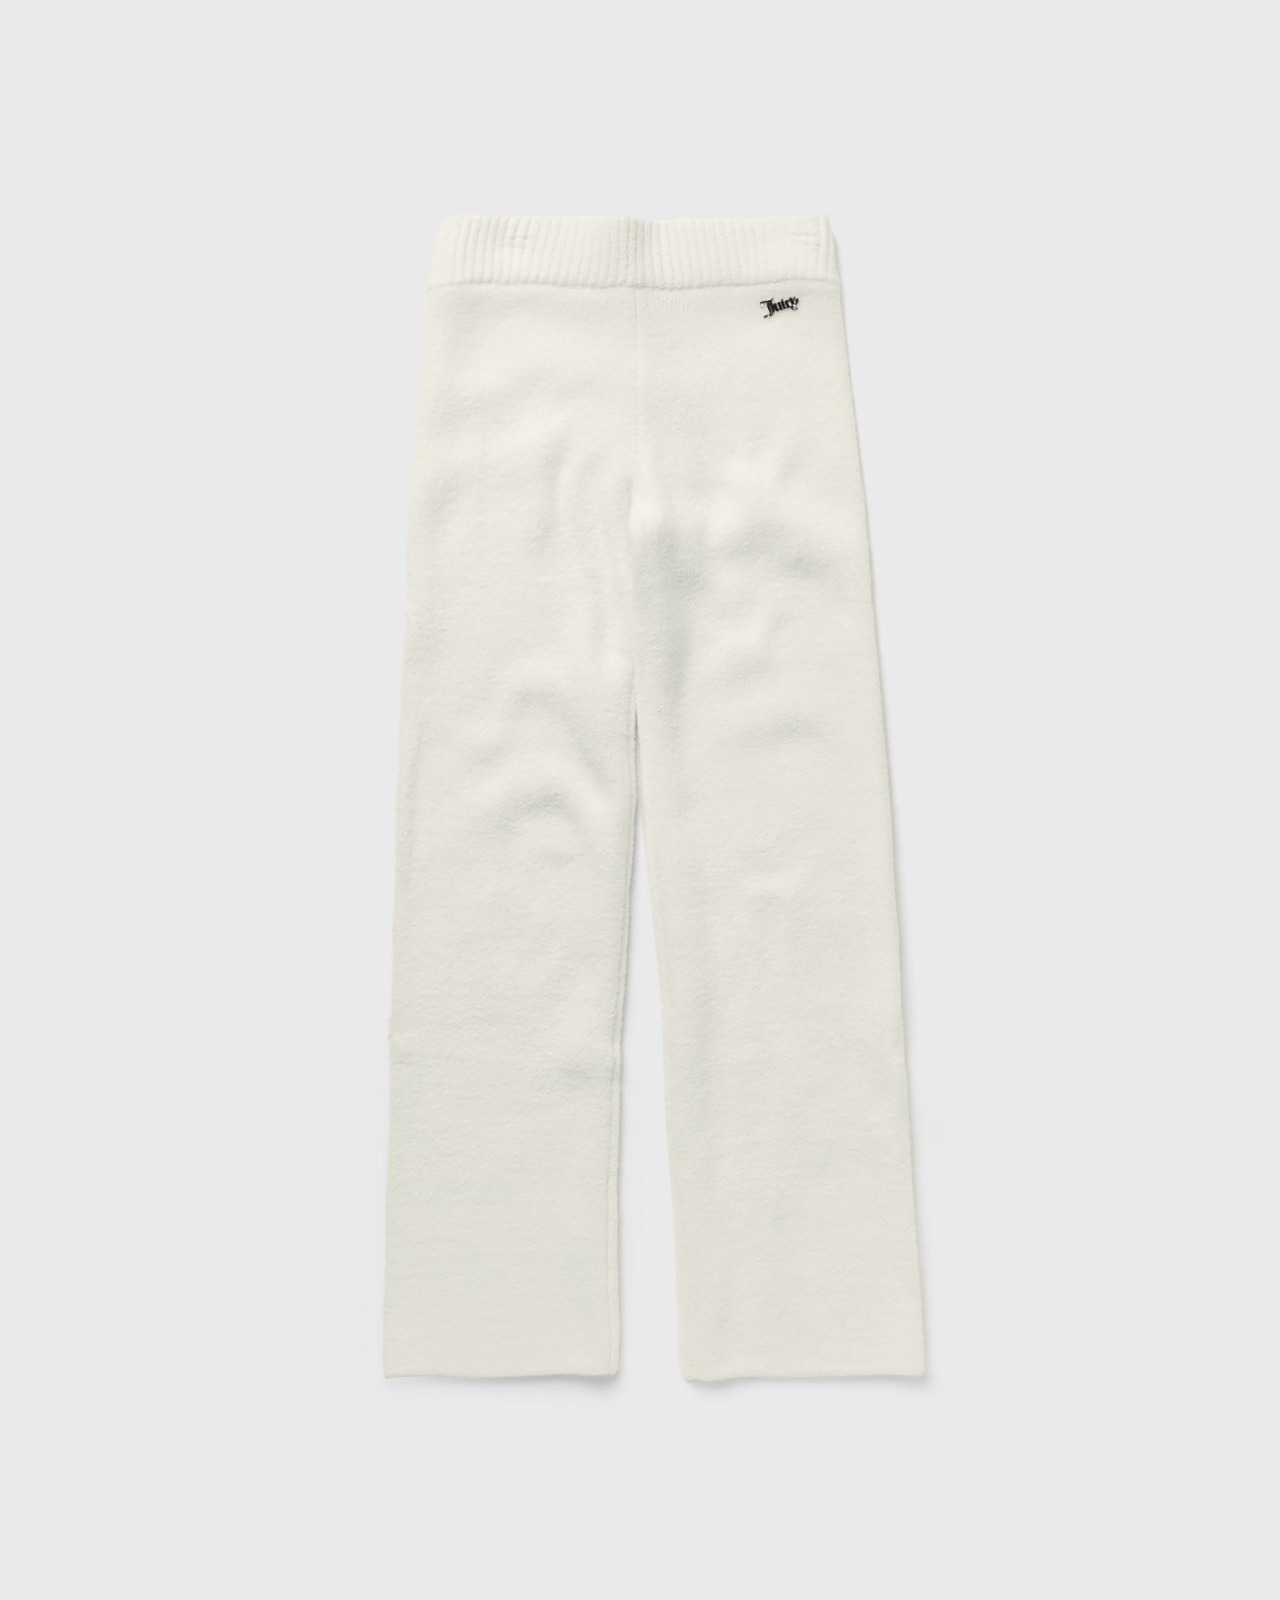 Juicy Couture - Woman White Sweatpants by Bstn GOOFASH